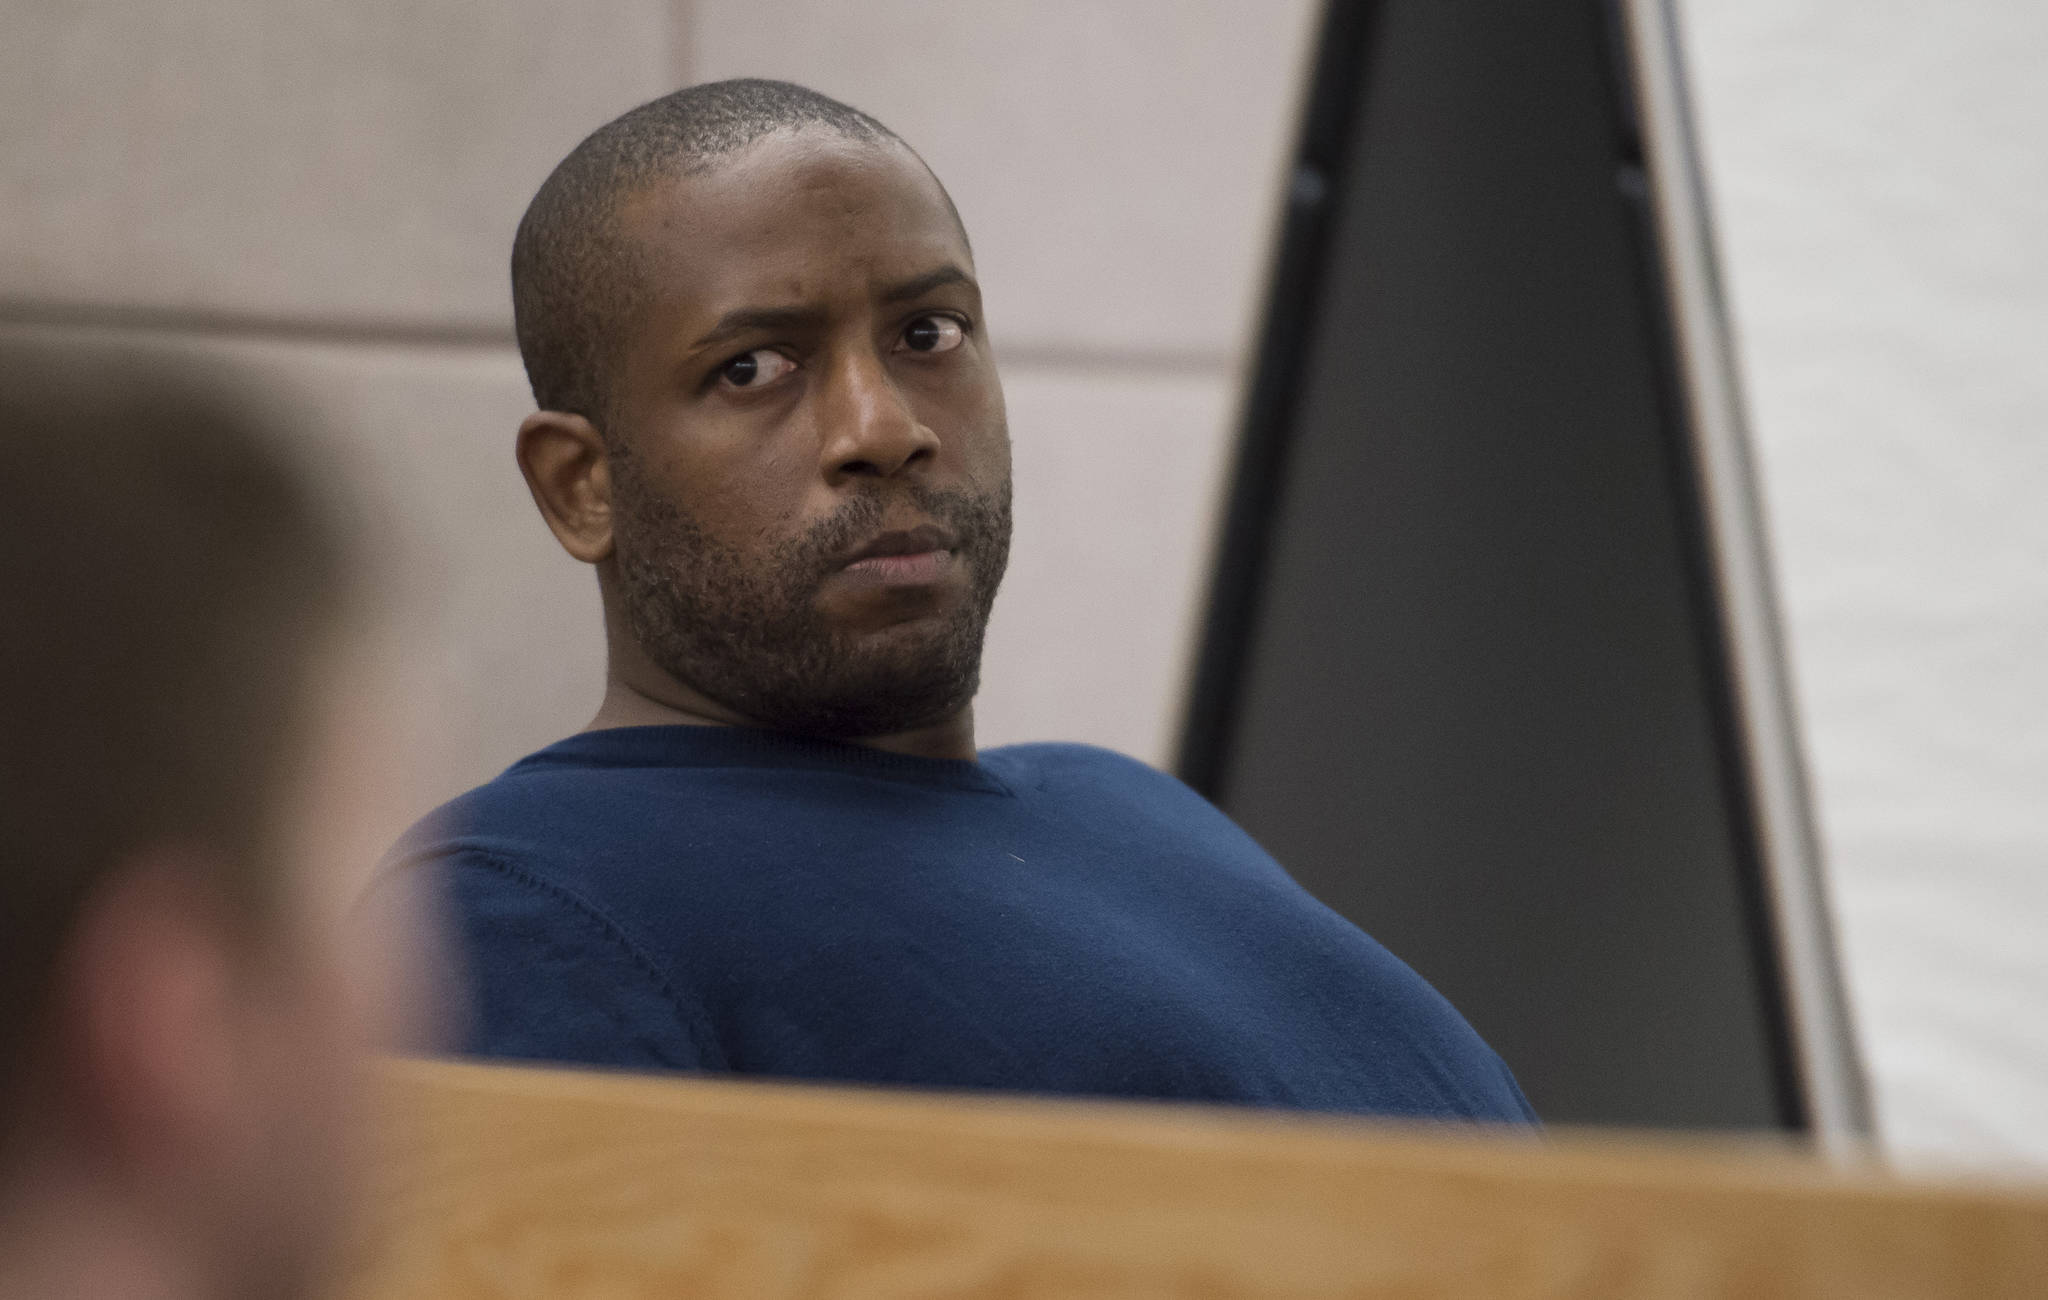 Laron Carlton Graham appears in Juneau Superior Court on Monday, Feb. 26, 2018, for an arraignment on two counts of first-degree murder for the Nov. 15, 2015 shooting deaths of 36-year-old Robert H. Meireis and 34-year-old Elizabeth K. Tonsmeire. (Michael Penn | Juneau Empire)